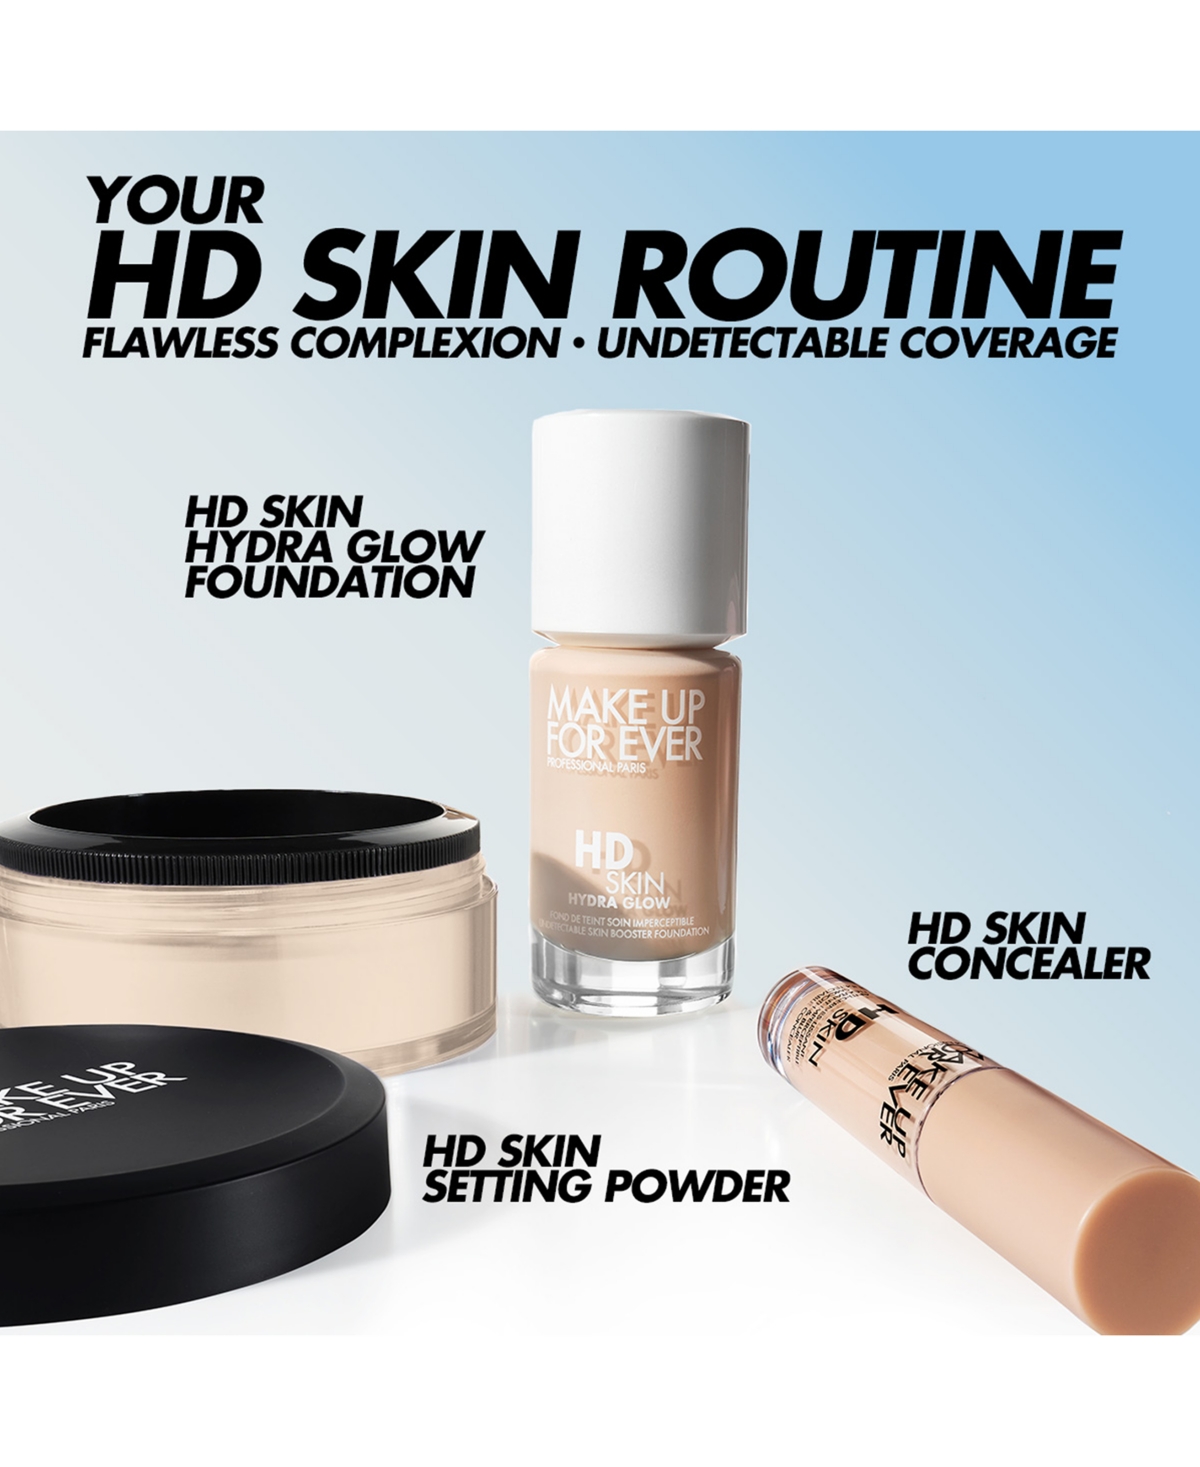 Shop Make Up For Ever Hd Skin Hydra Glow Skincare Foundation With Hyaluronic Acid In R - Cool Mapleâ - For Tan Skin With Ros